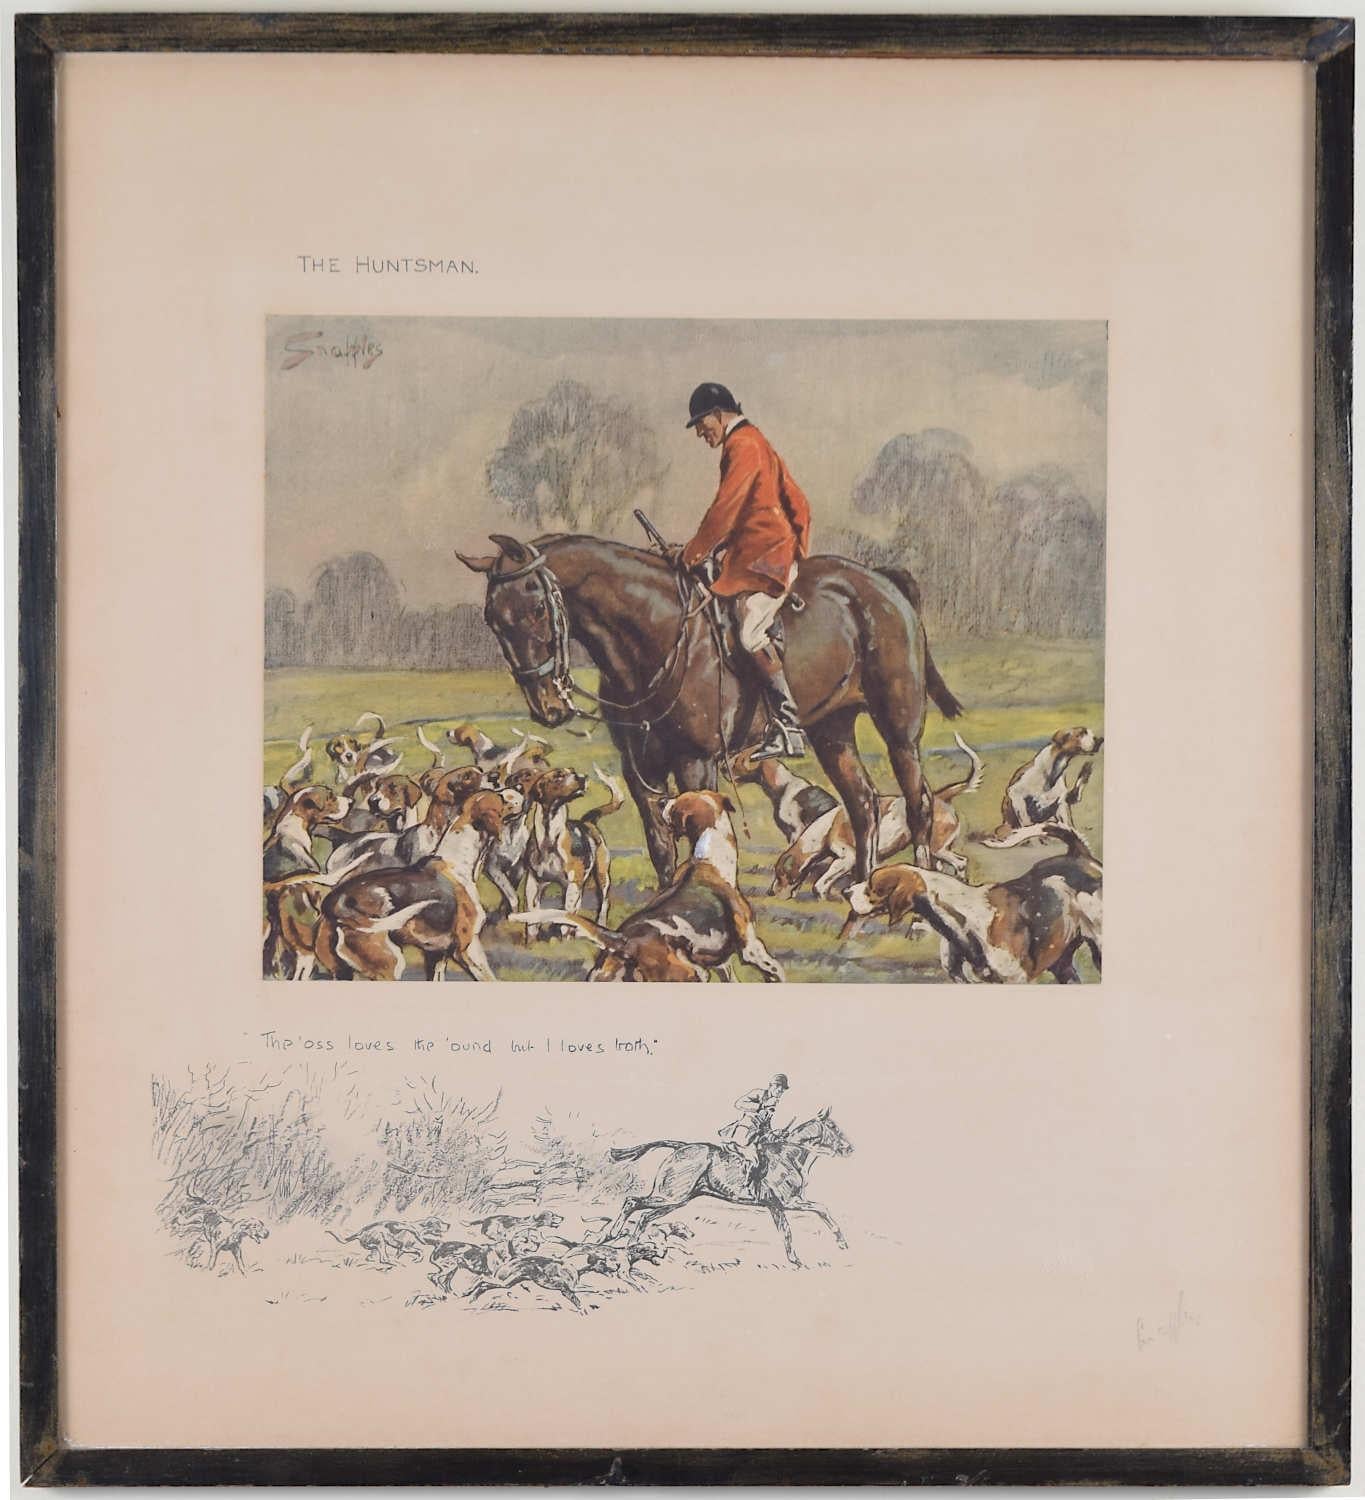 Charles "Snaffles" Johnson Payne Landscape Print - Snaffles: 'The Huntsman' signed lithograph - "The 'oss loves the 'ound"